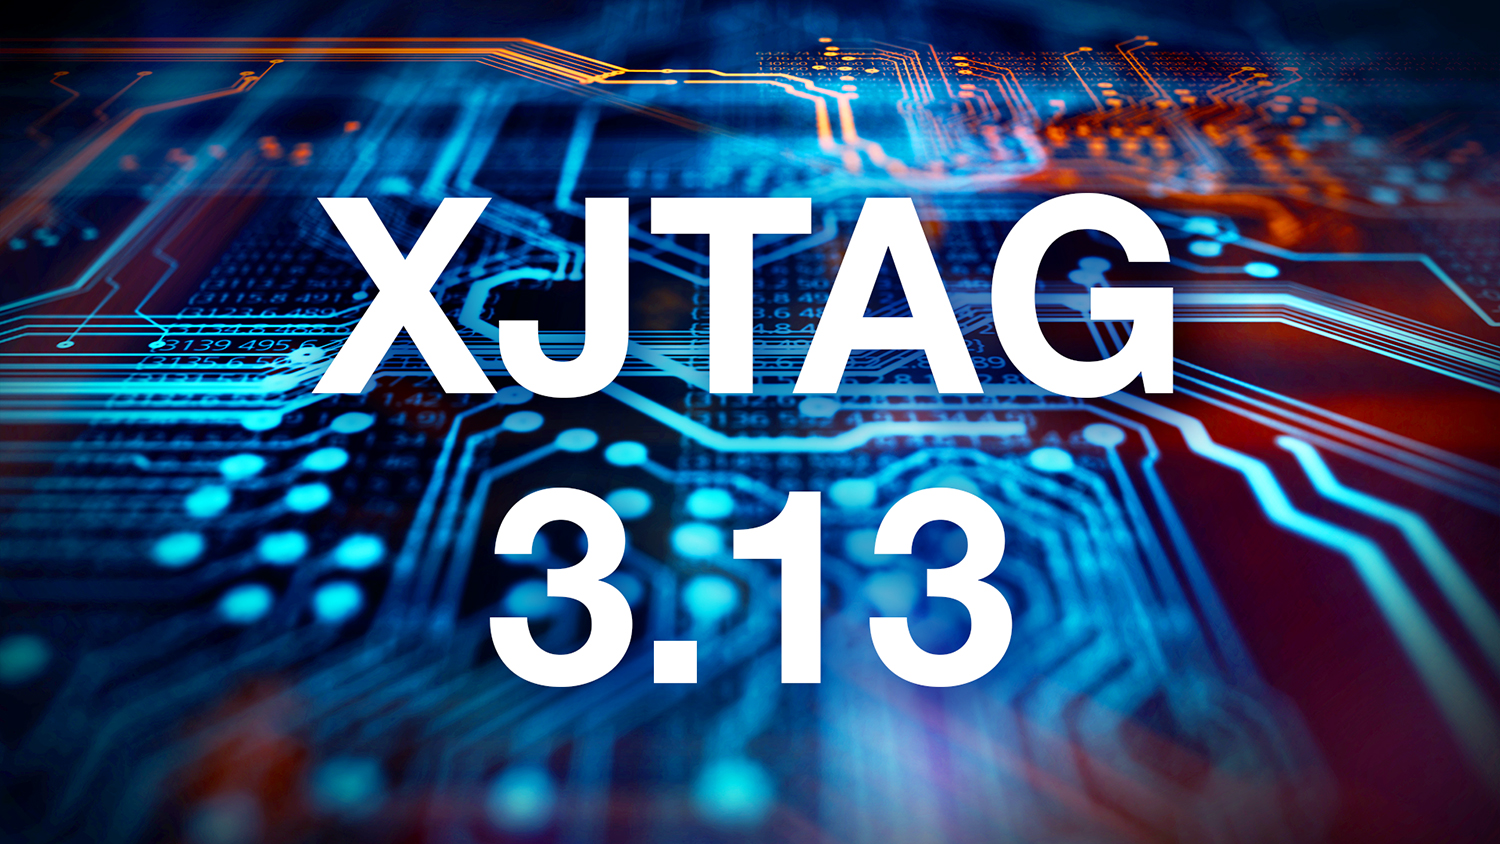 XJTAG 3.13 software release announcement